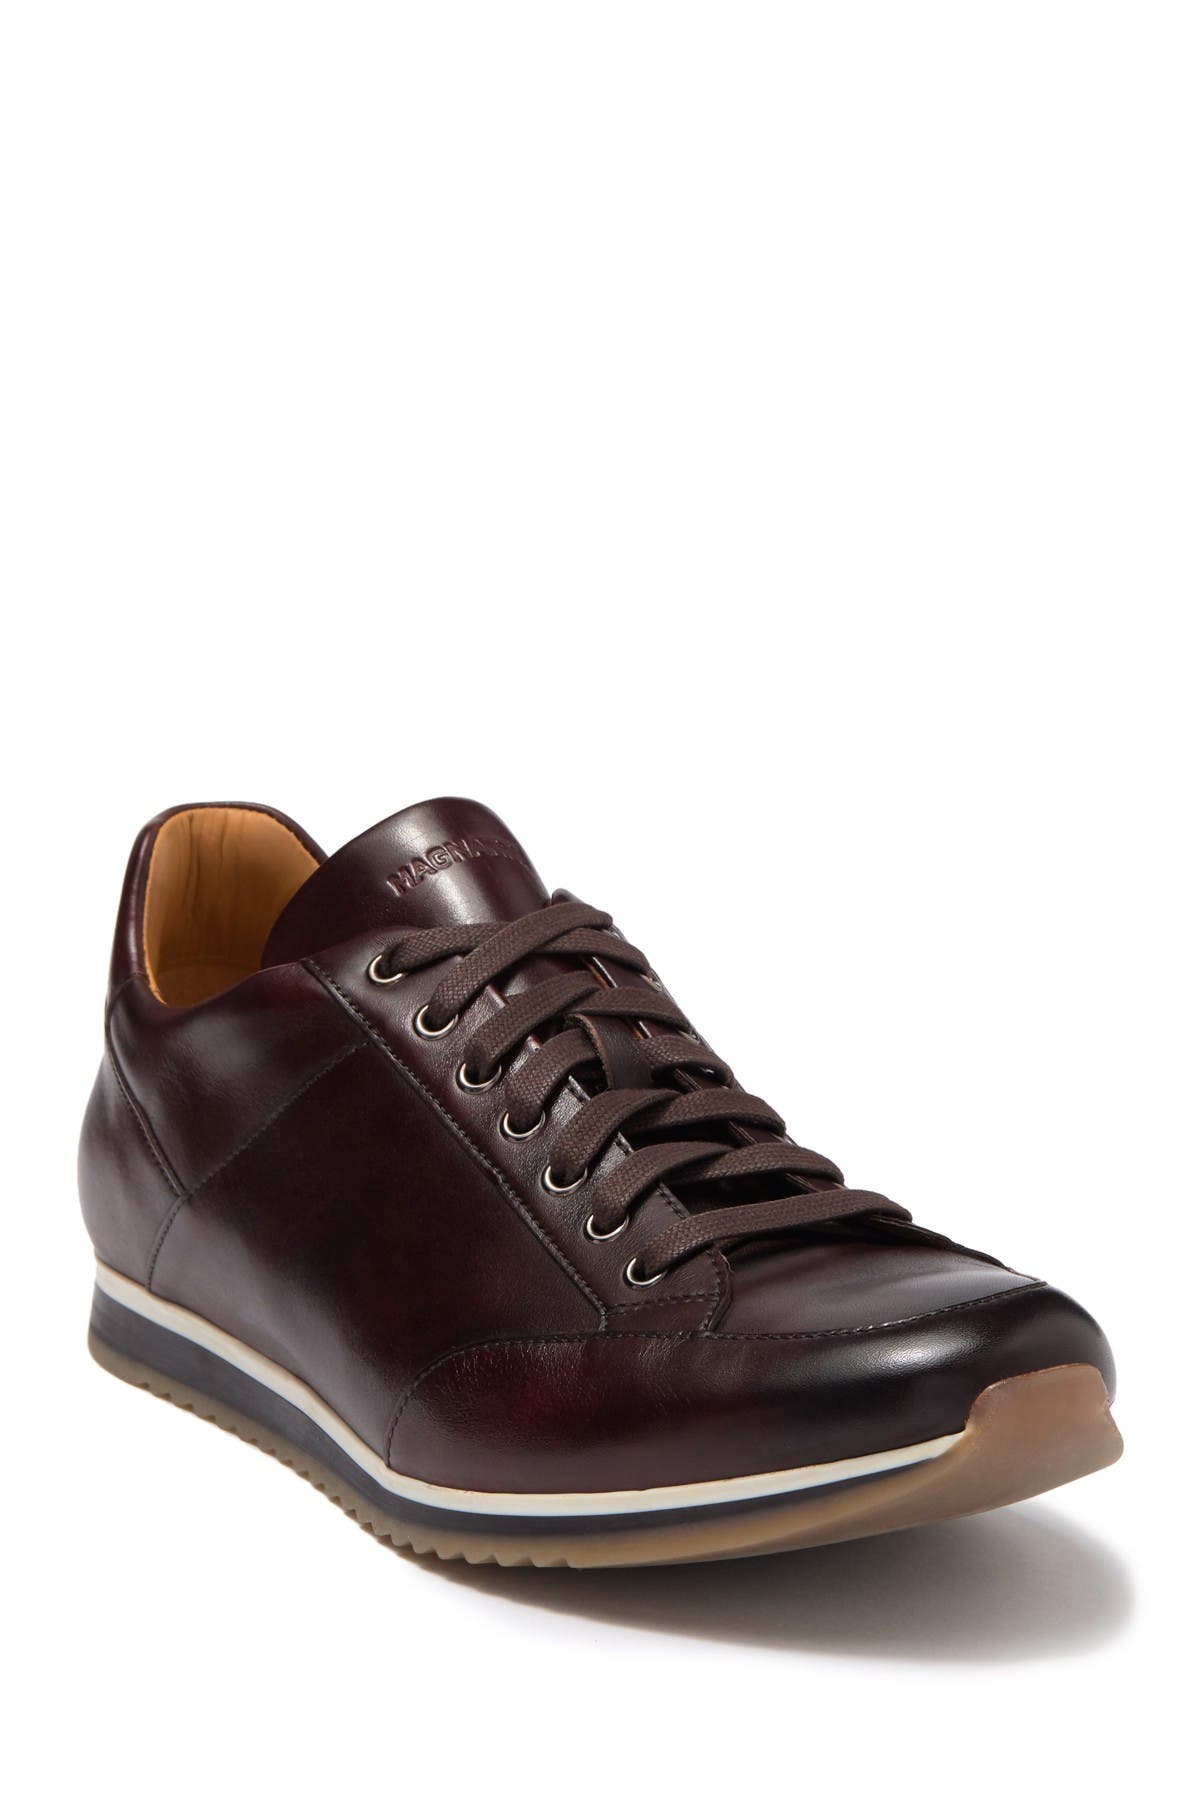 Magnanni | Chaz II Leather Sneaker 